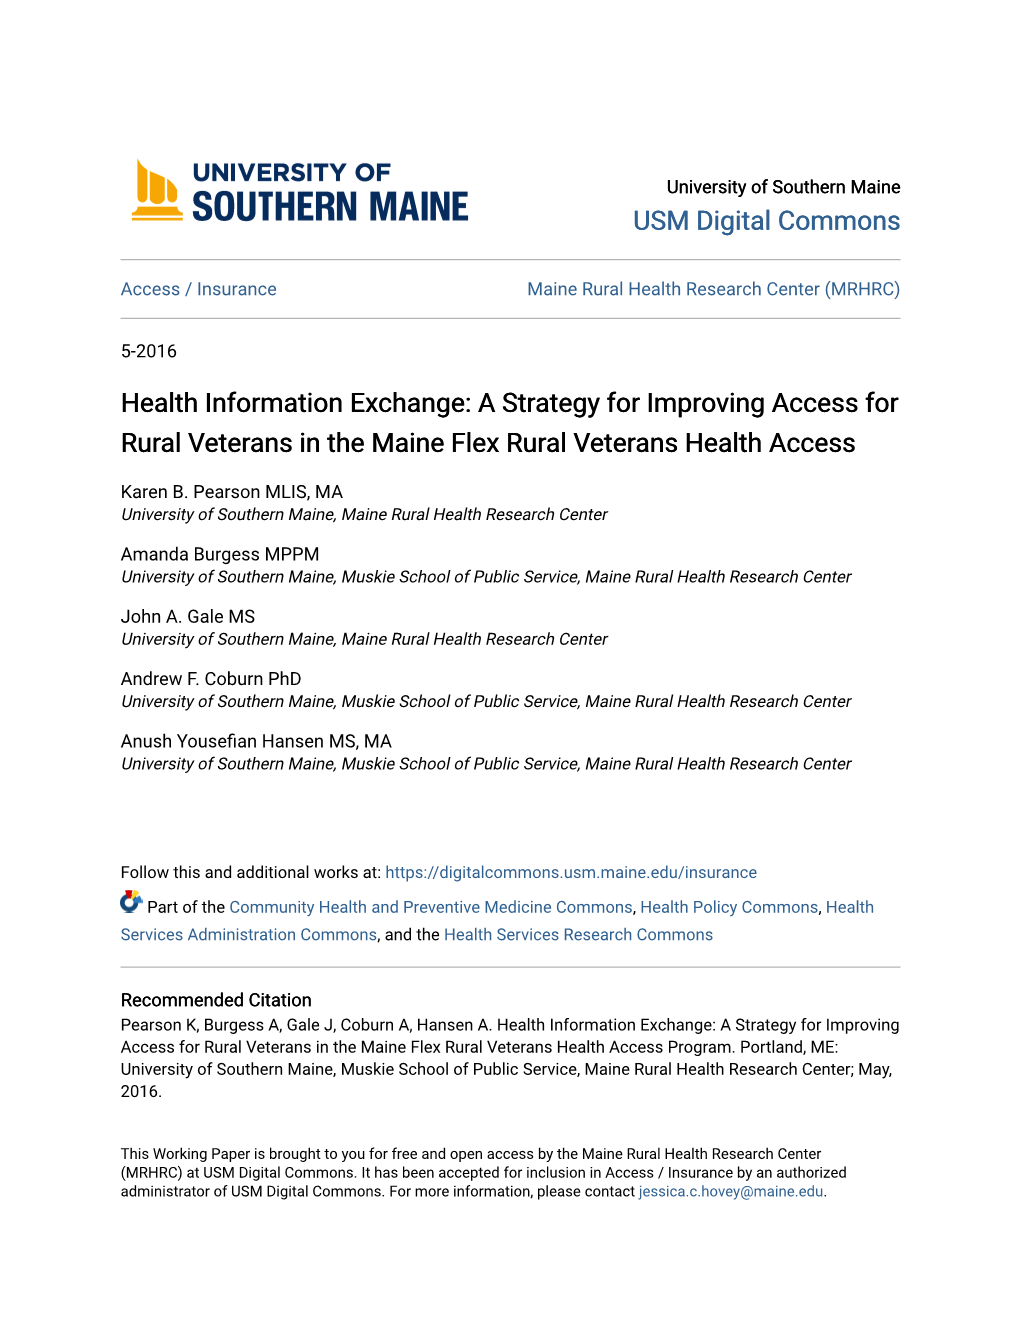 Health Information Exchange: a Strategy for Improving Access for Rural Veterans in the Maine Flex Rural Veterans Health Access